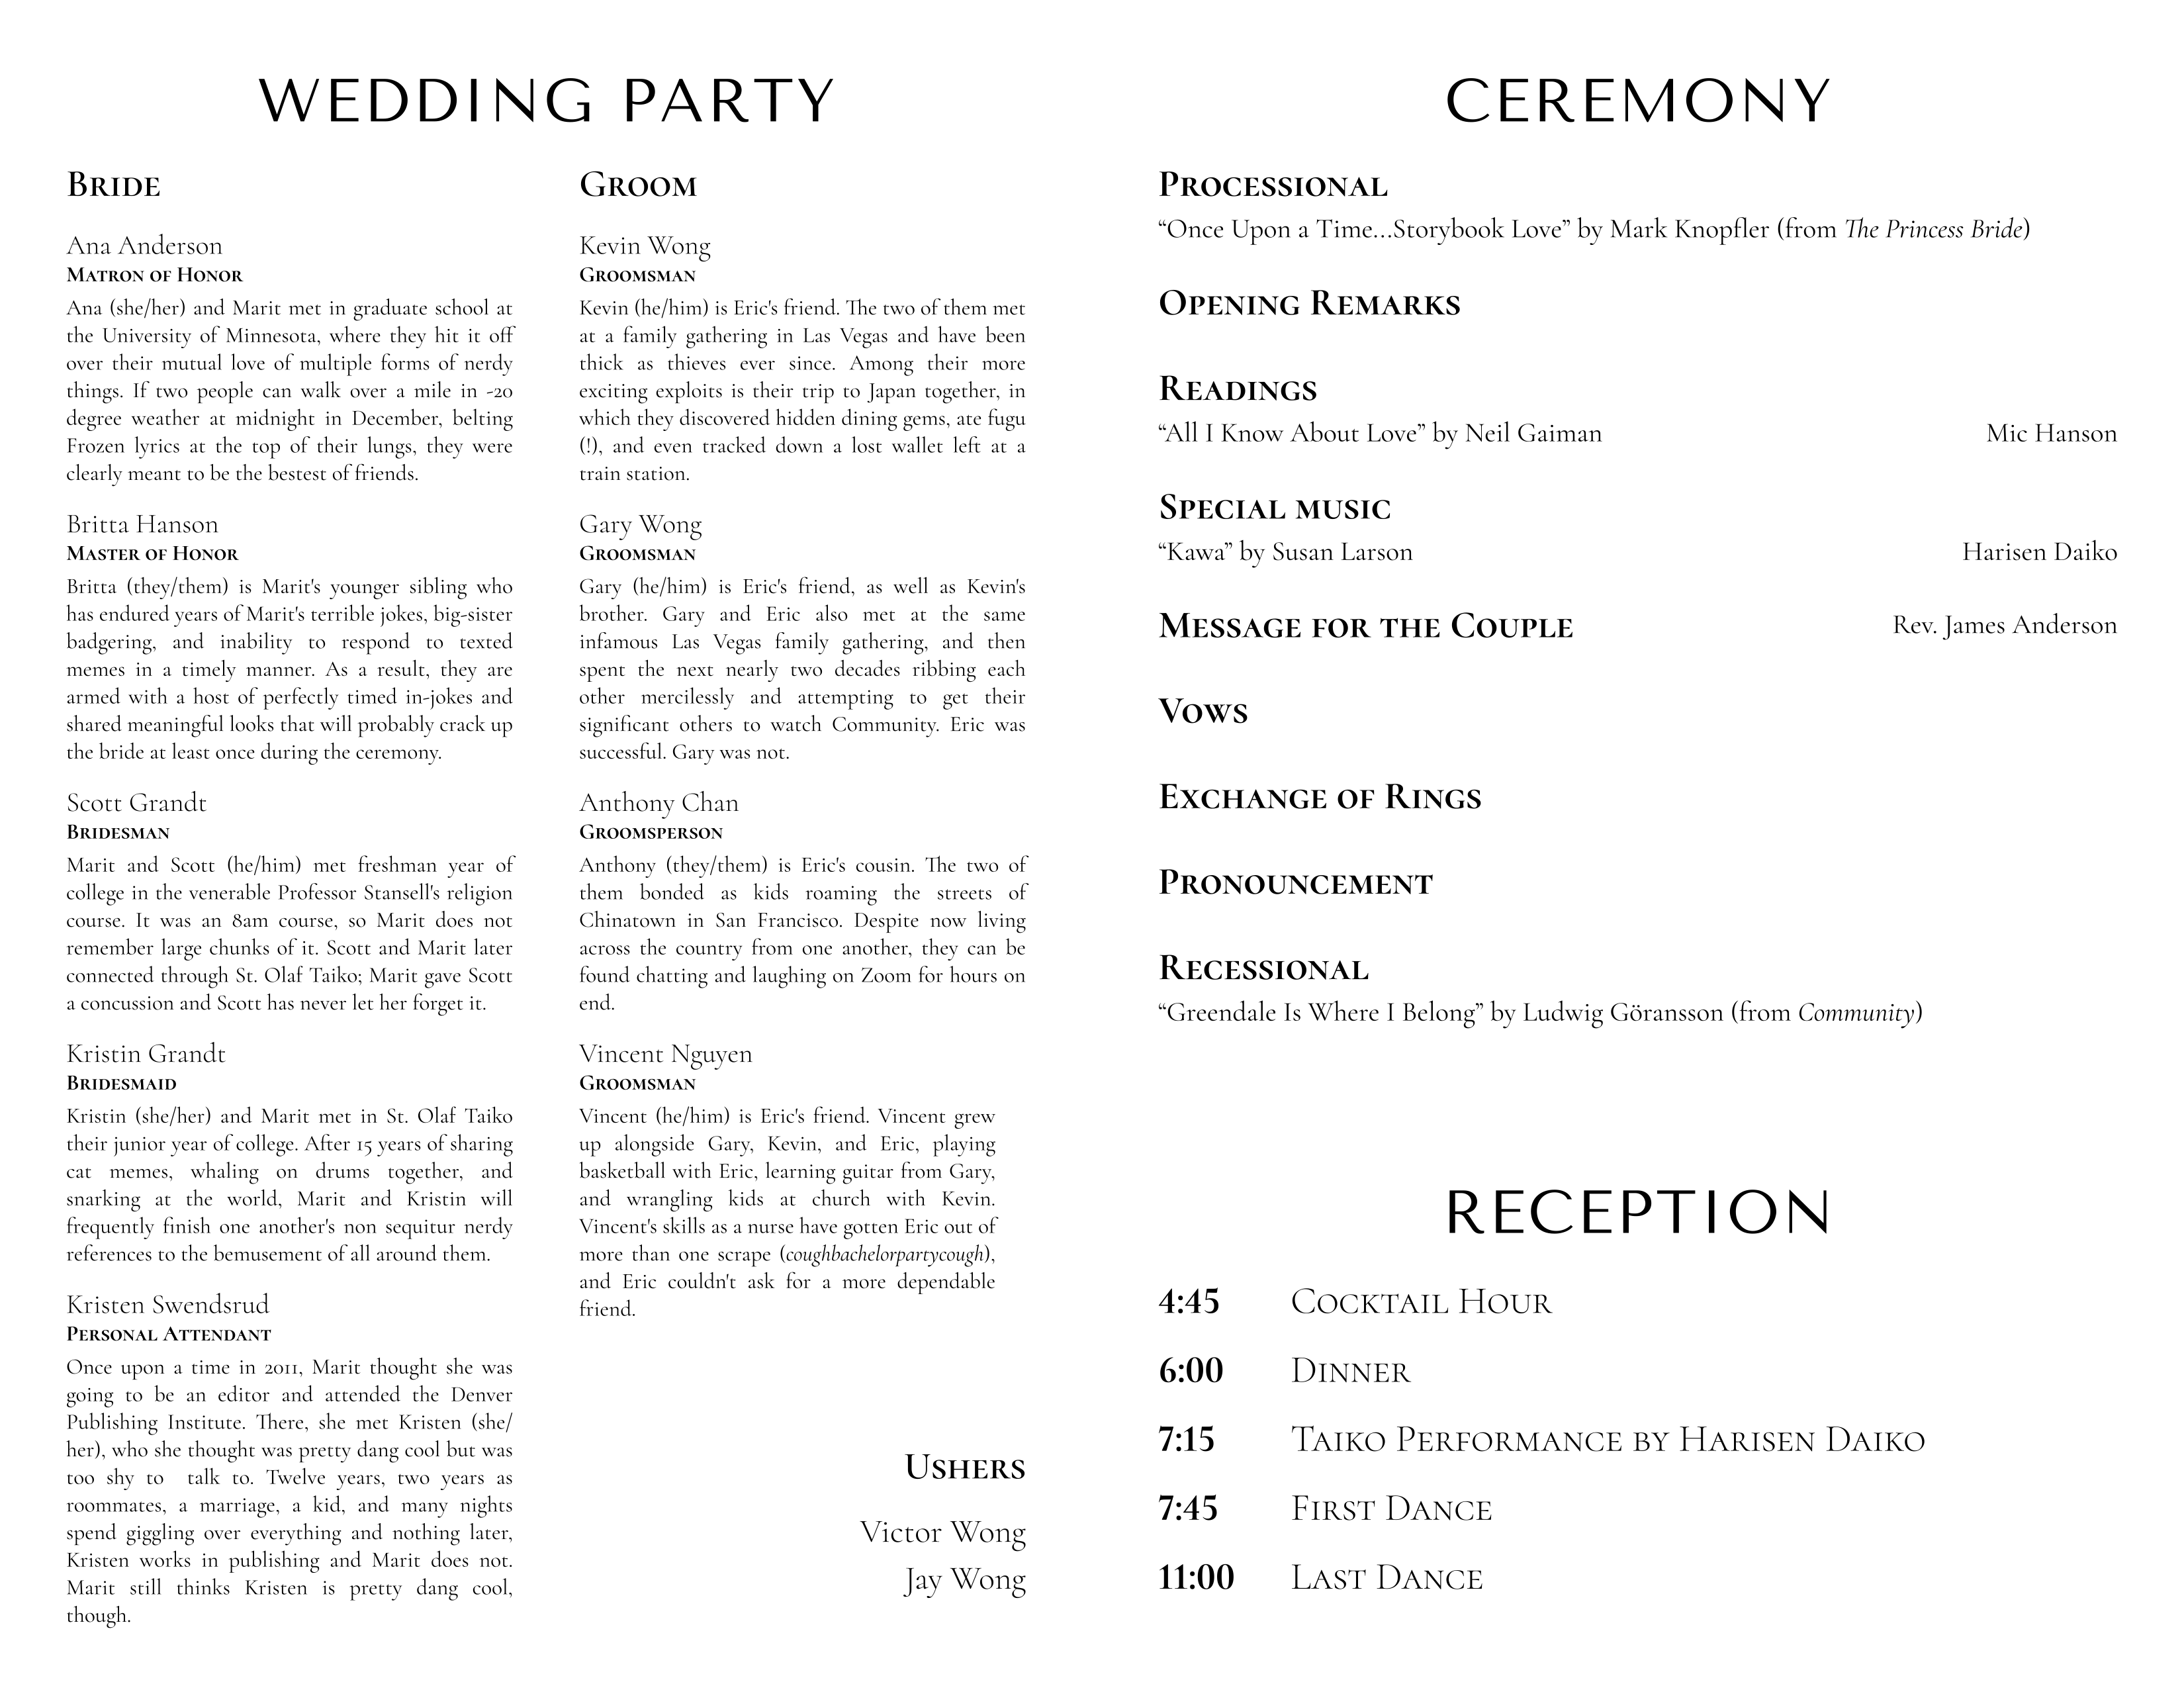 Program interior with attendant bios, ceremony items, and reception timeline